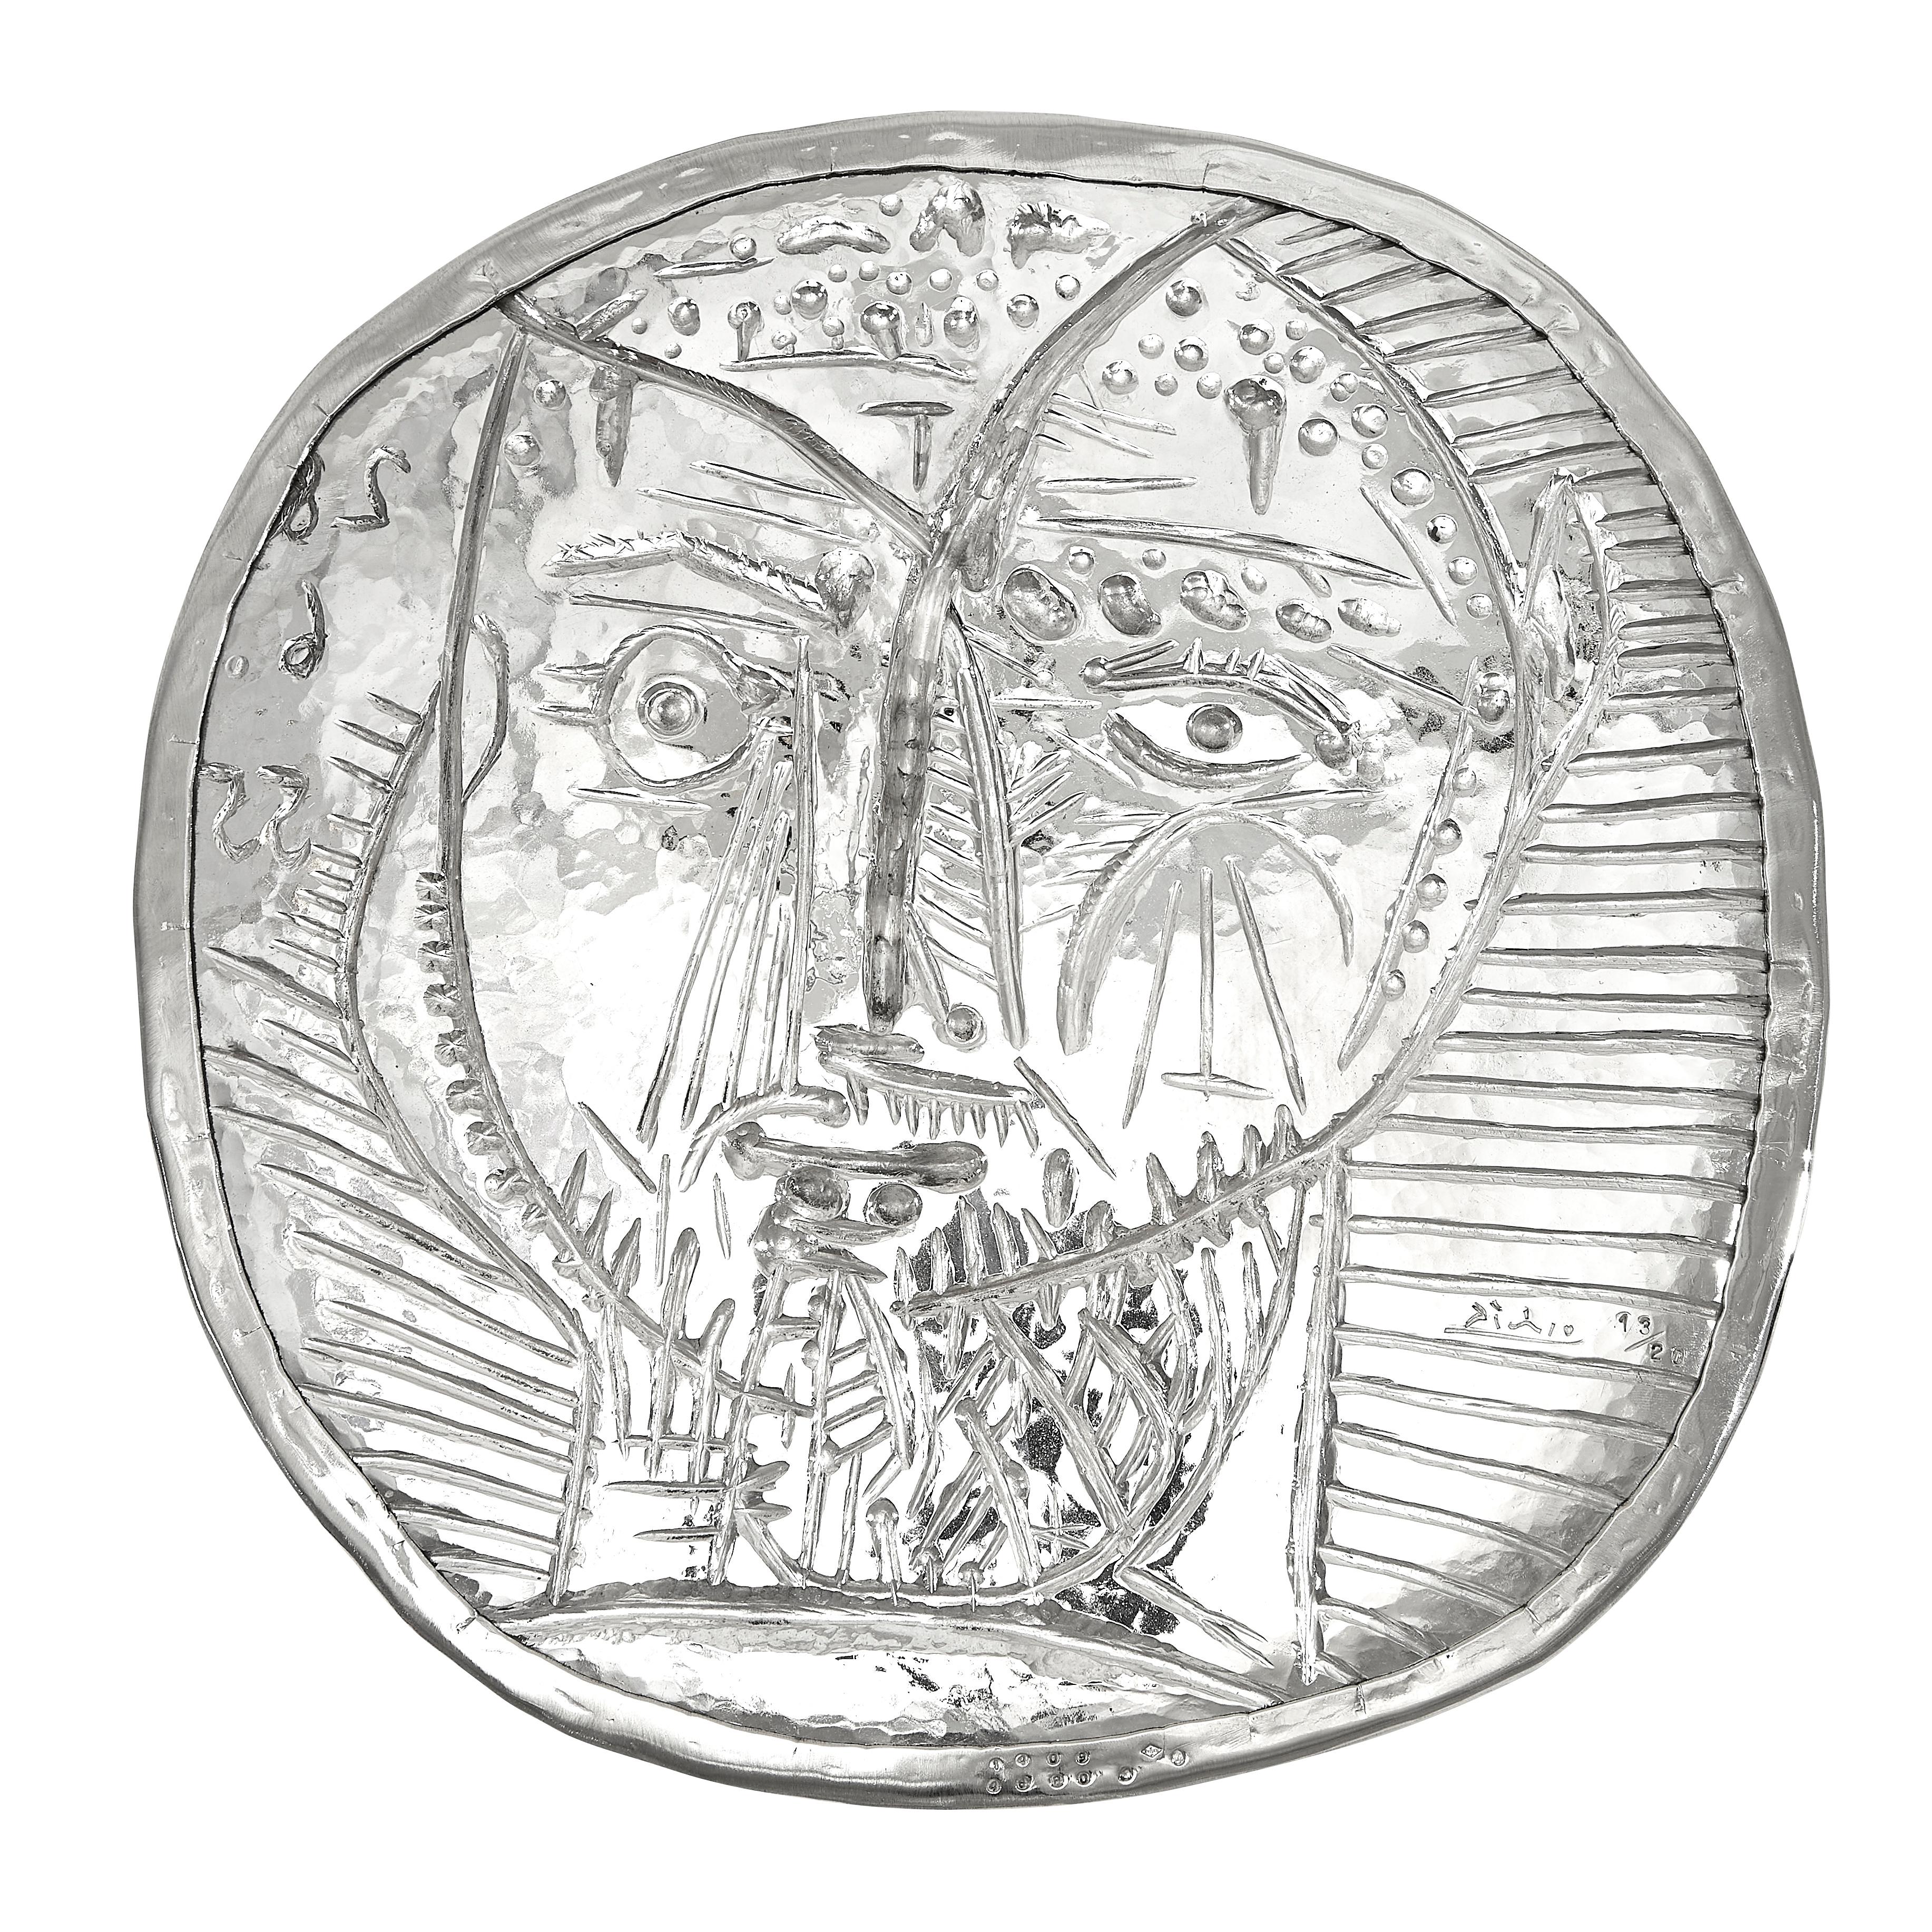 PABLO PICASSO (1881-1973) 
Visage de faune (A. R. 283)

Silver repoussé plate conceived in 1956 and executed in silver by Pierre Hugo in 1977, from an edition of 20 plus two exemplaires d'artiste and two exemplaires d'auteur.